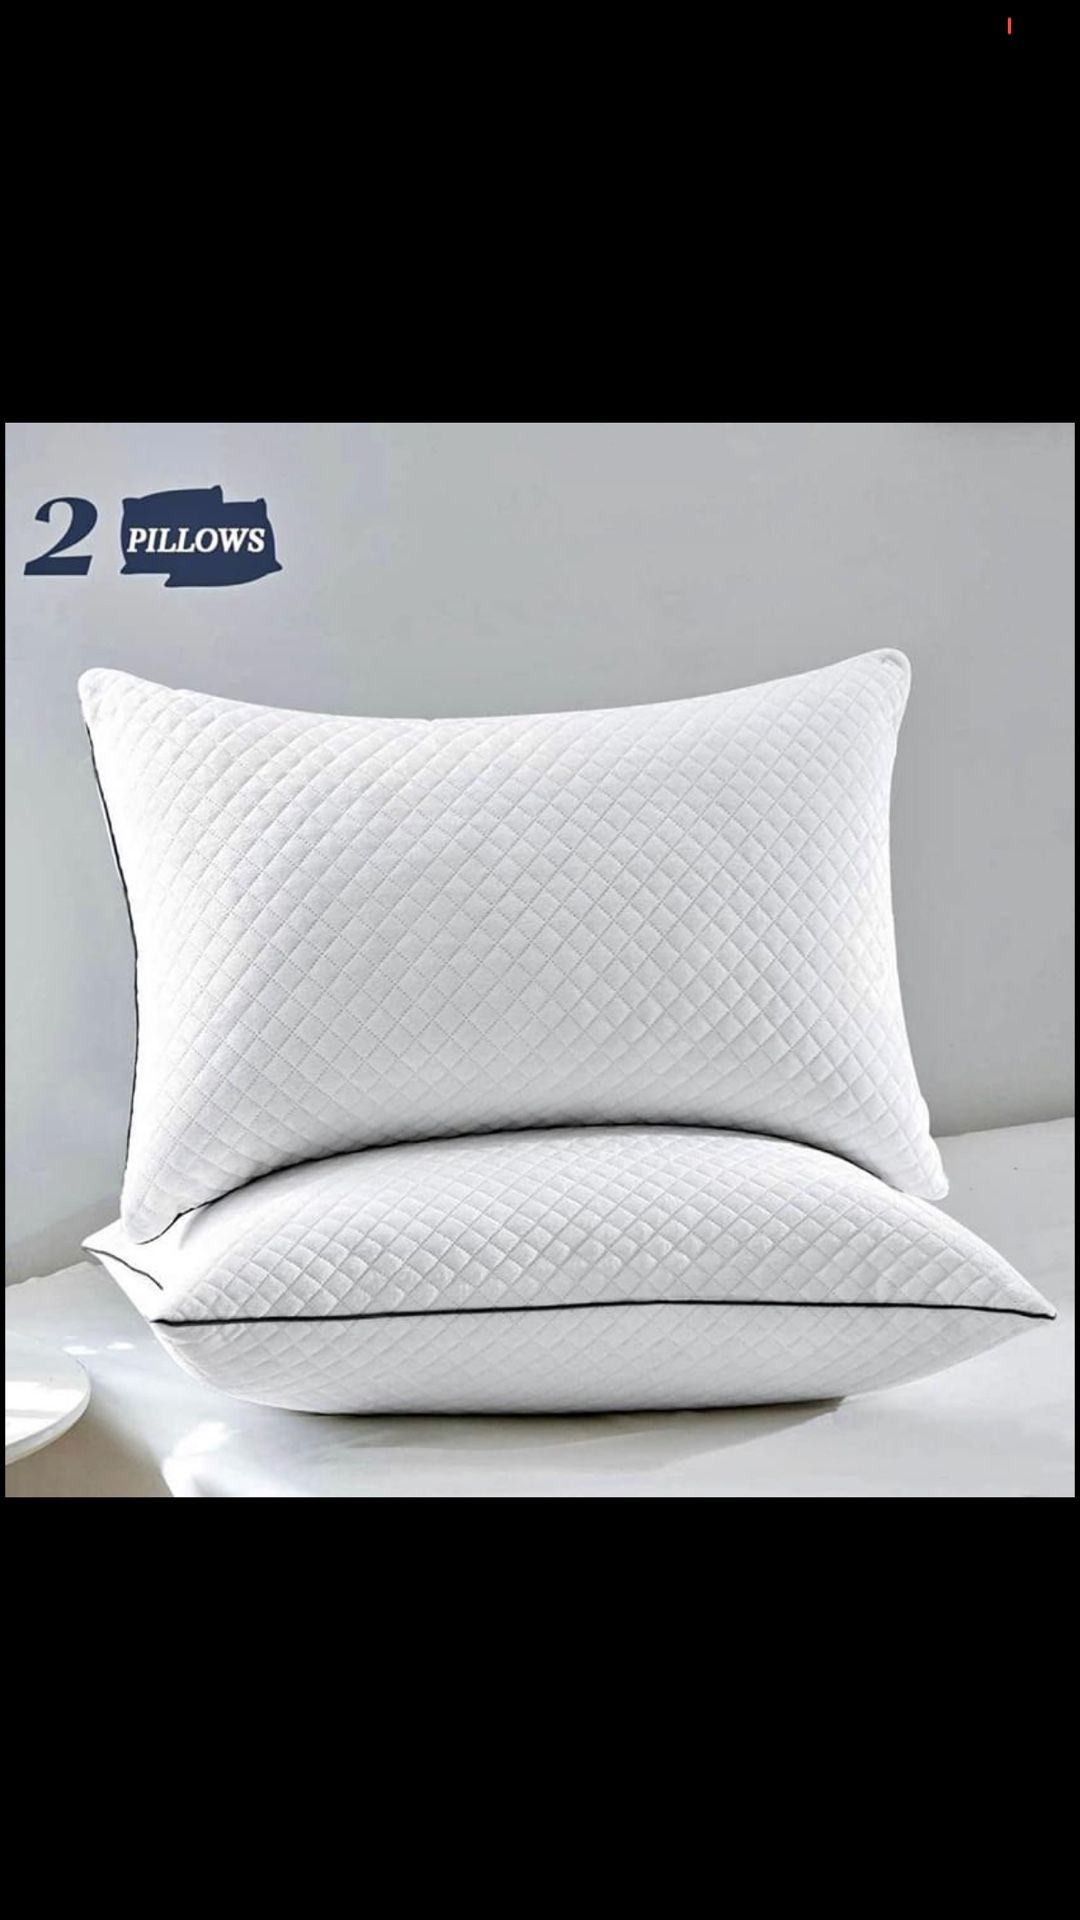 Bed Pillows for Sleeping 2 Pack